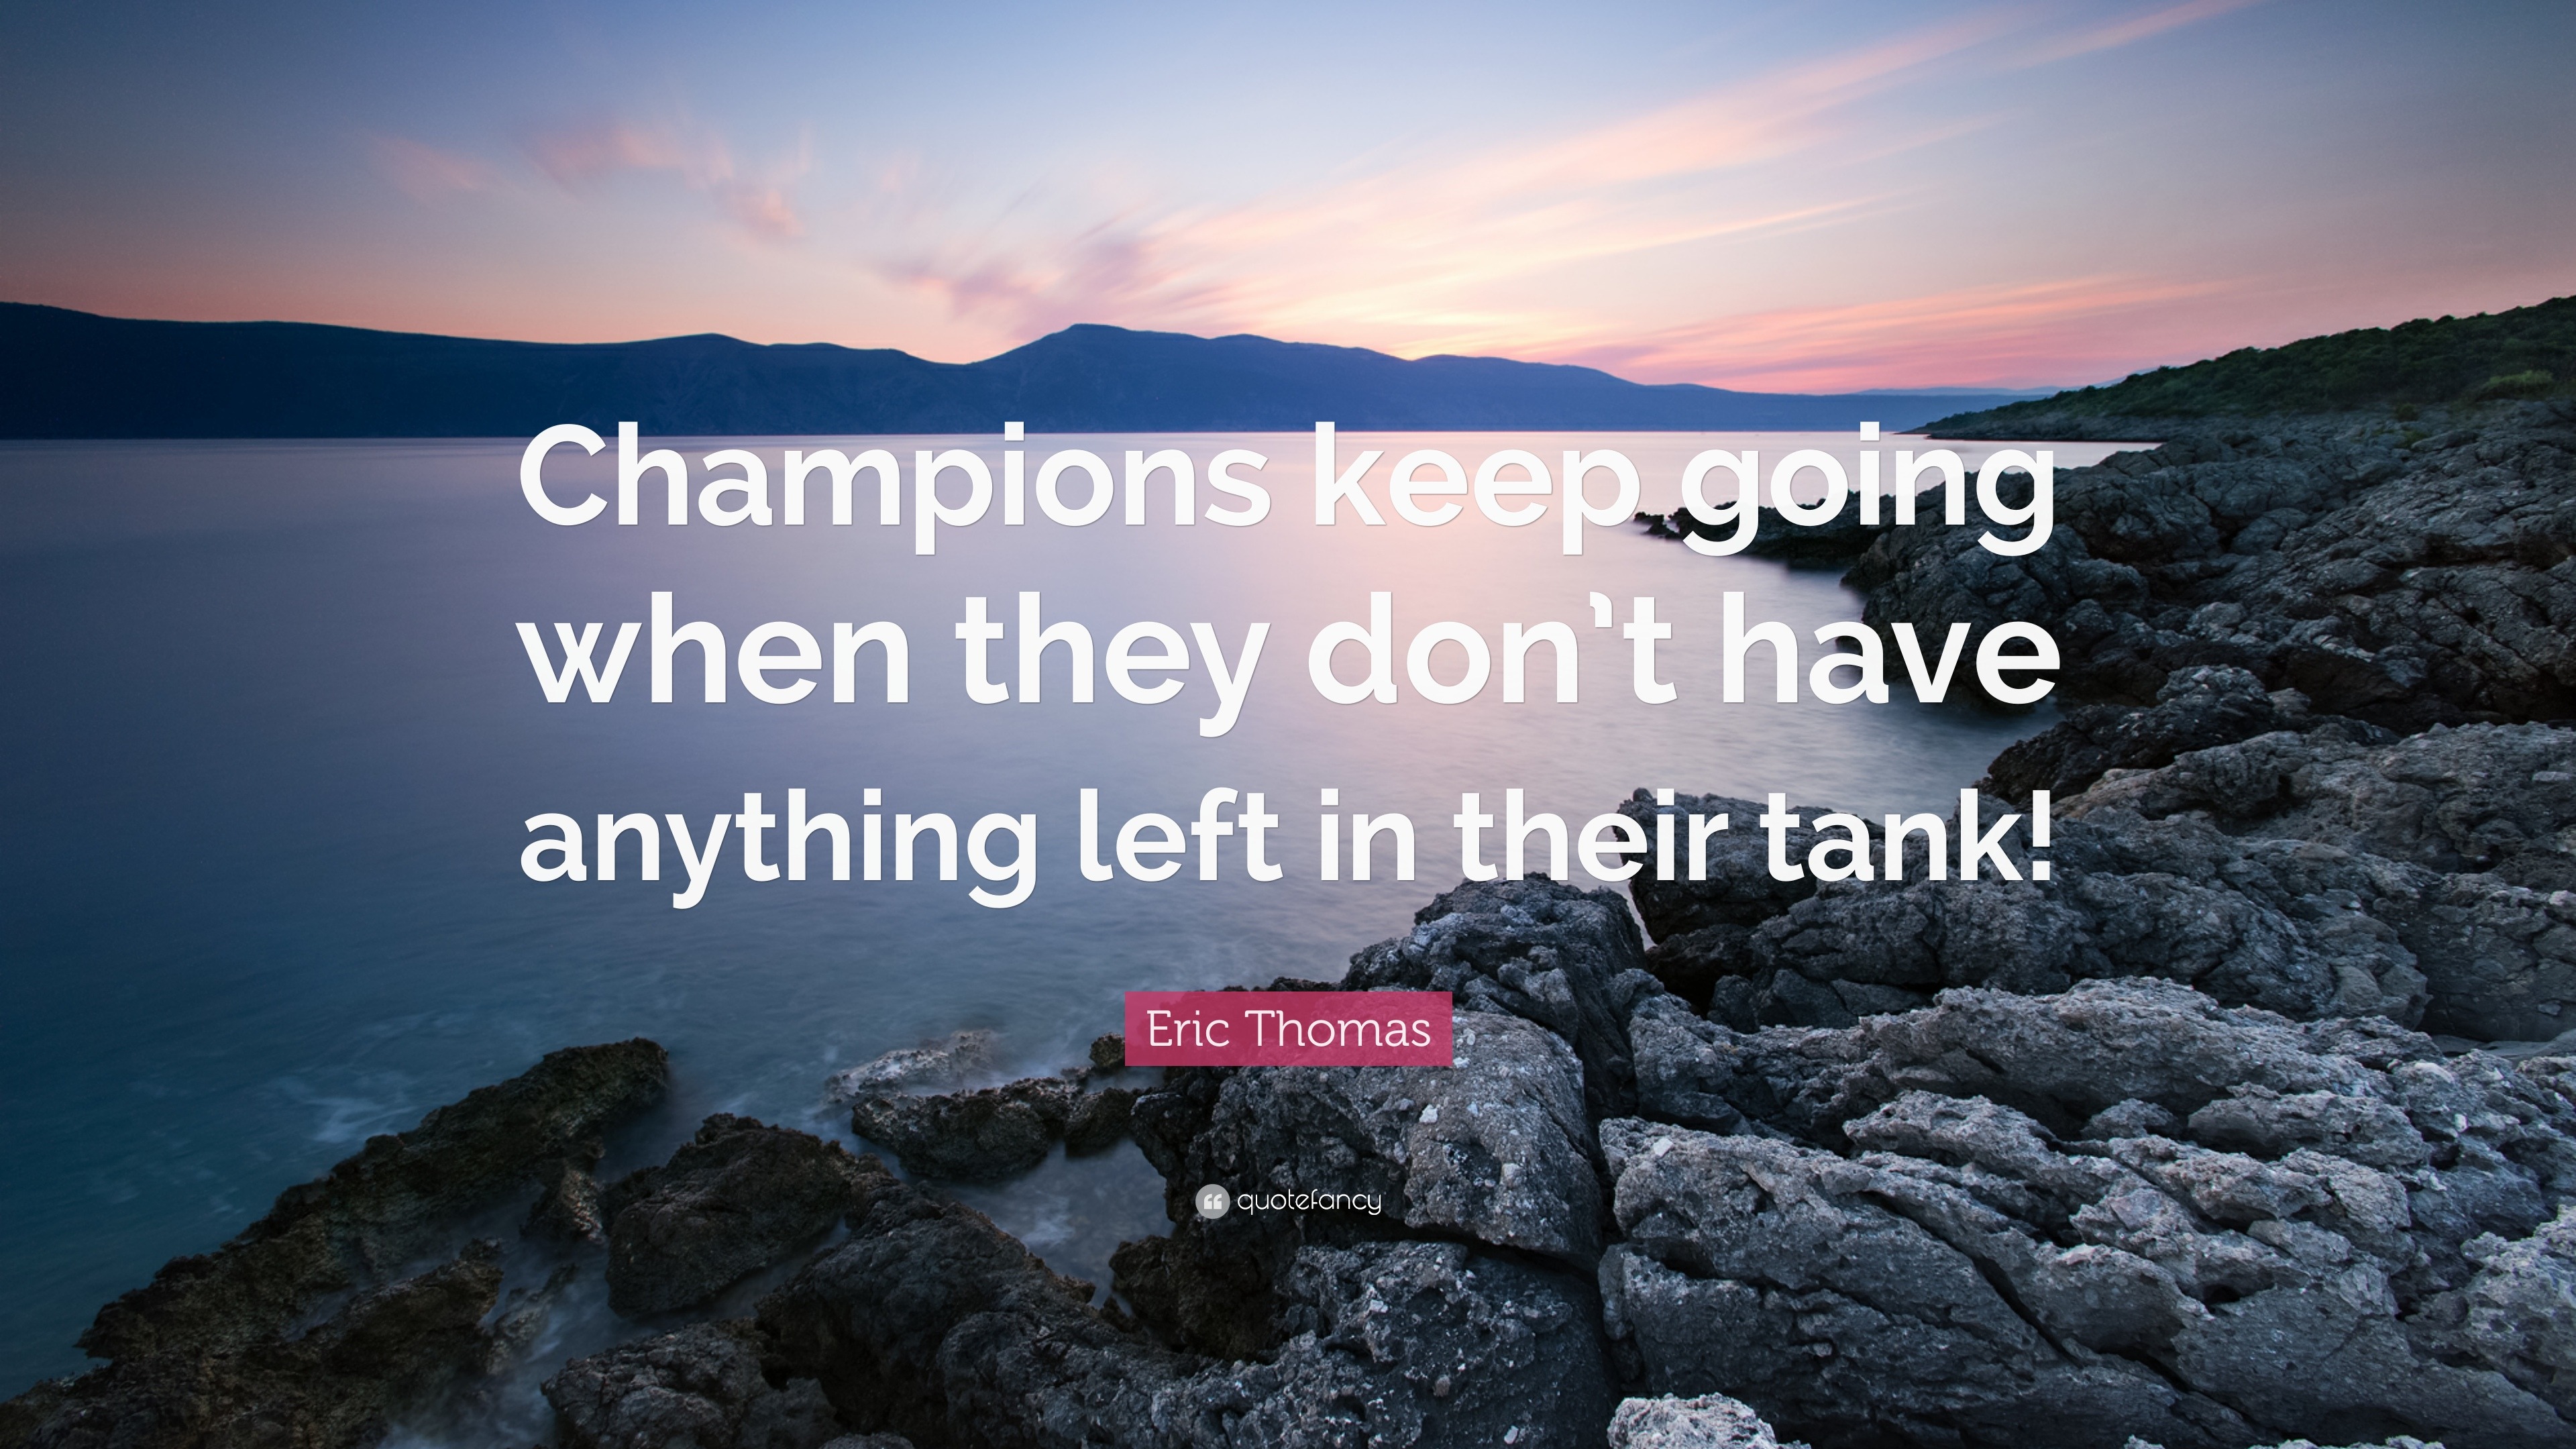 Eric Quote: “Champions keep going when they don't have anything left in their tank!”